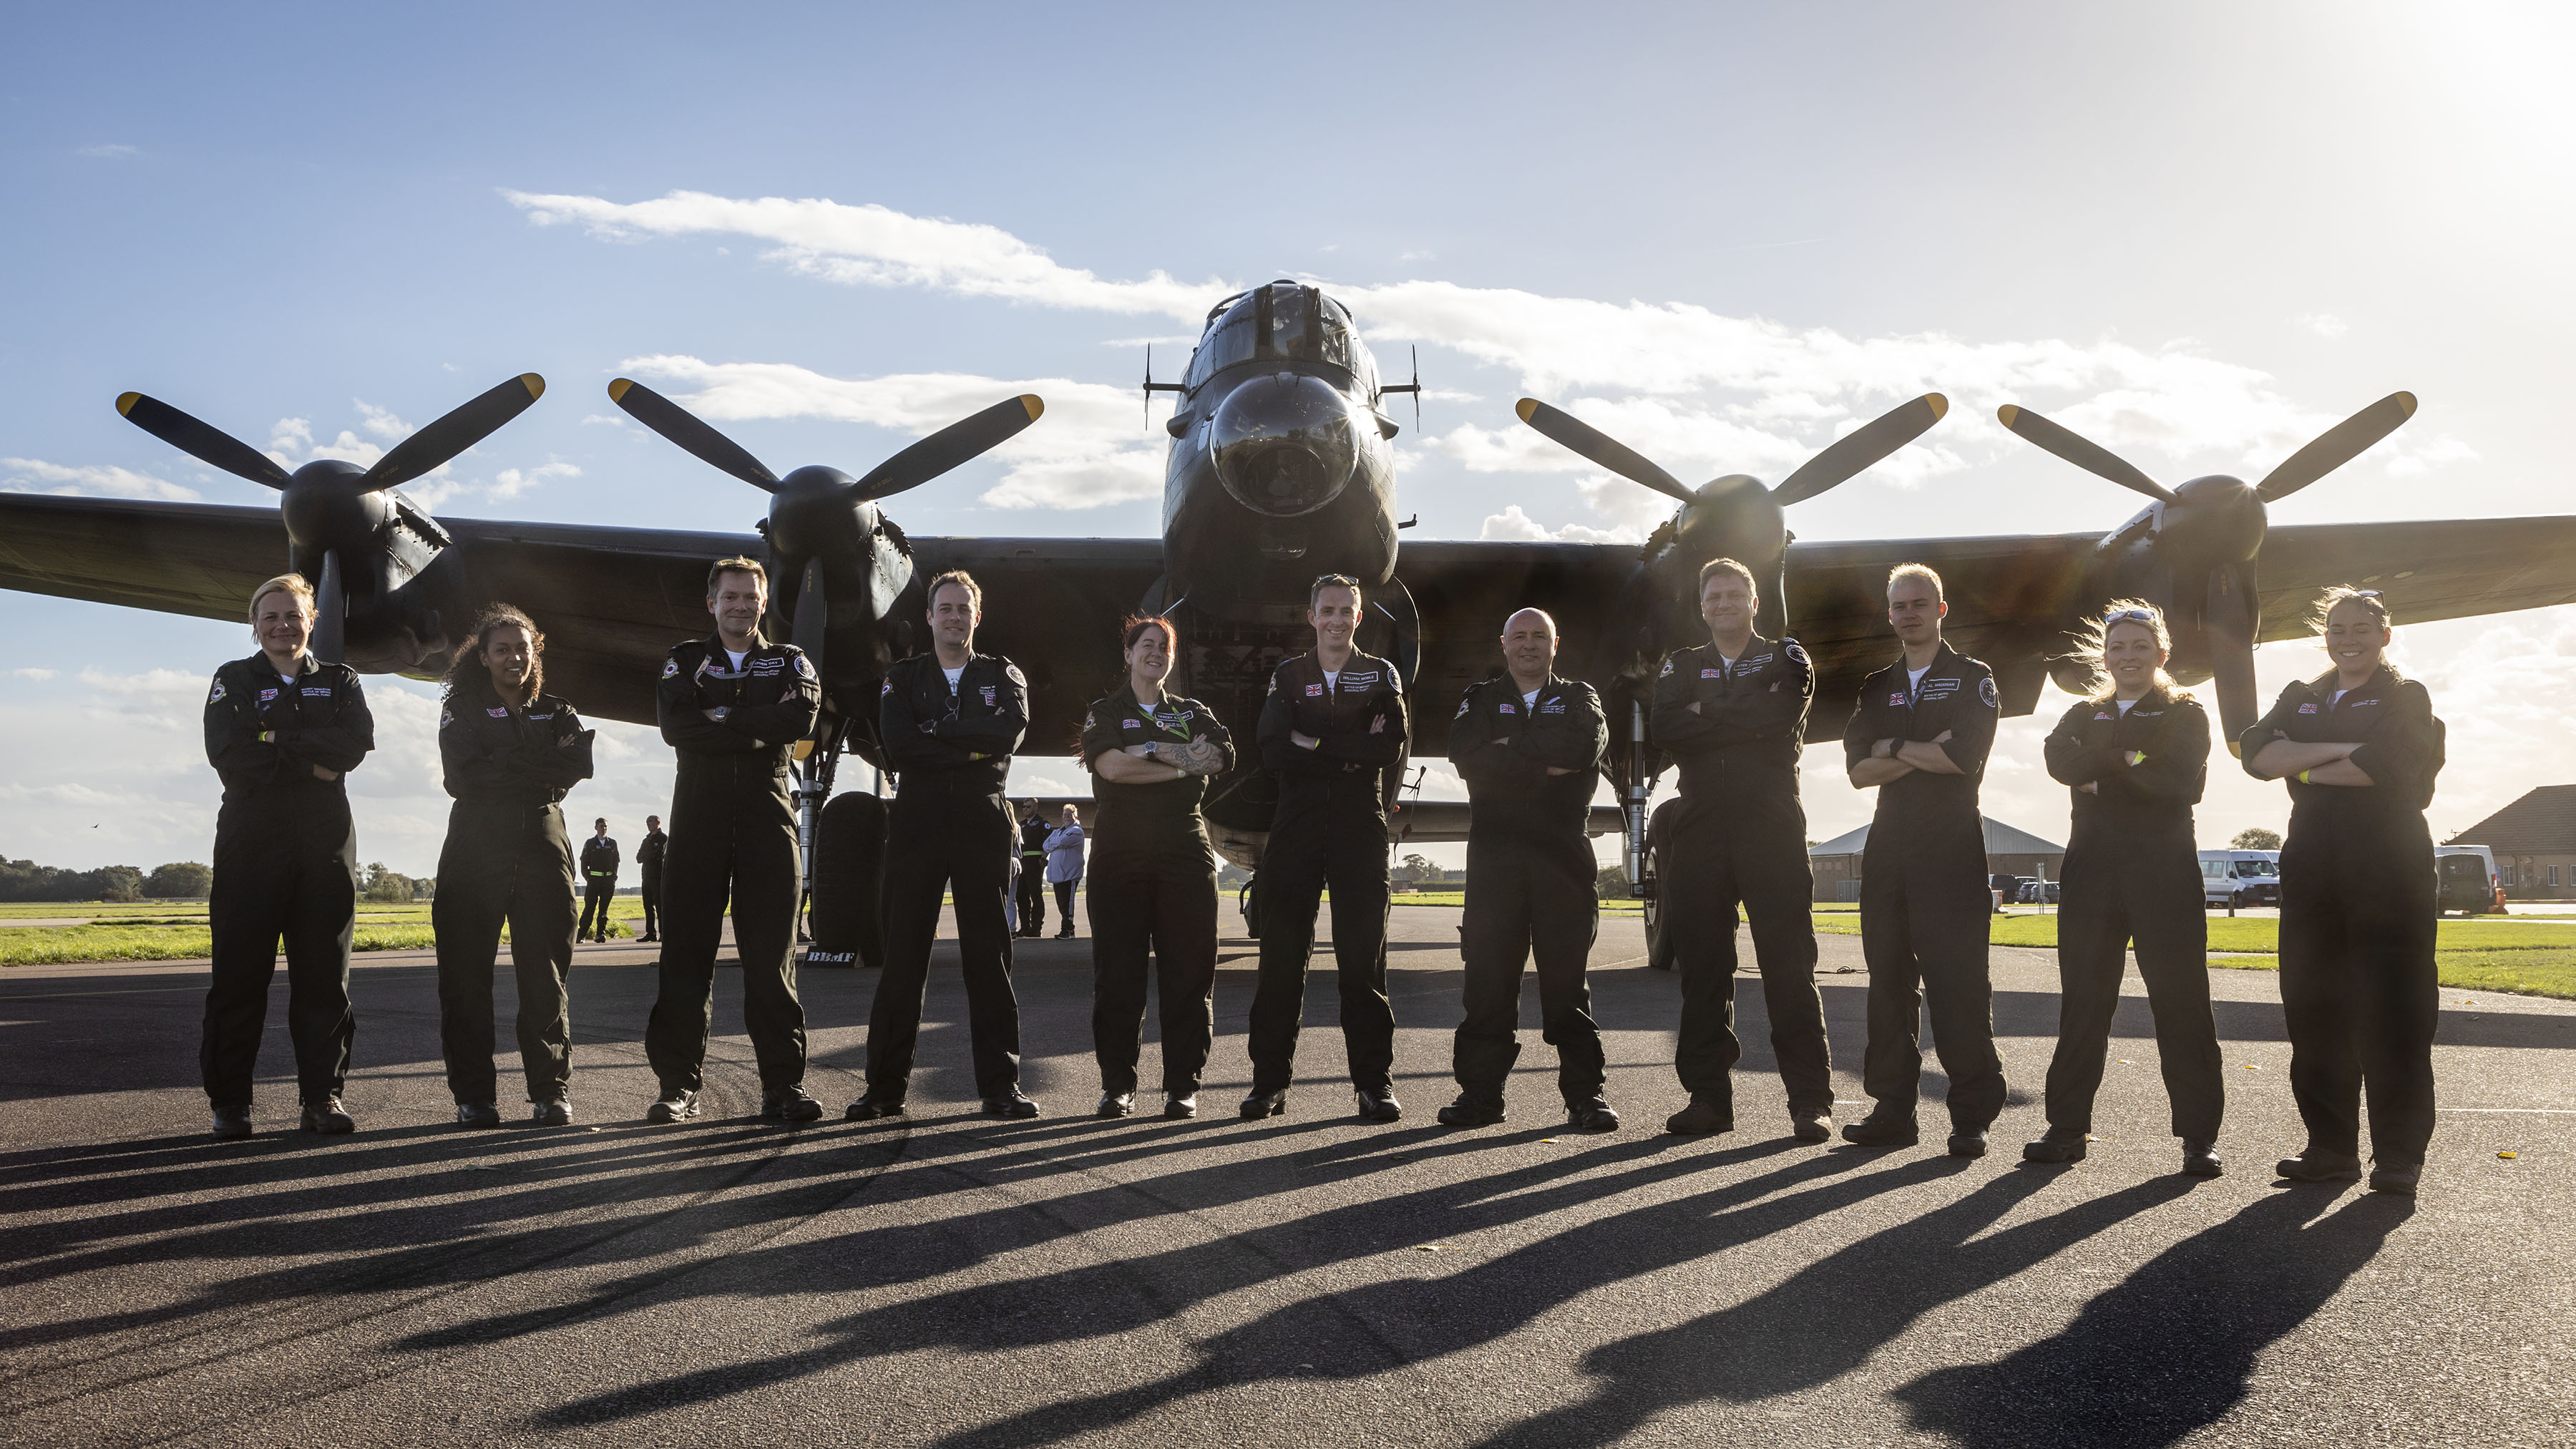 Image shows the Battle of Britain Memorial Flight team standing in front of their Lancaster Bomber aircraft.